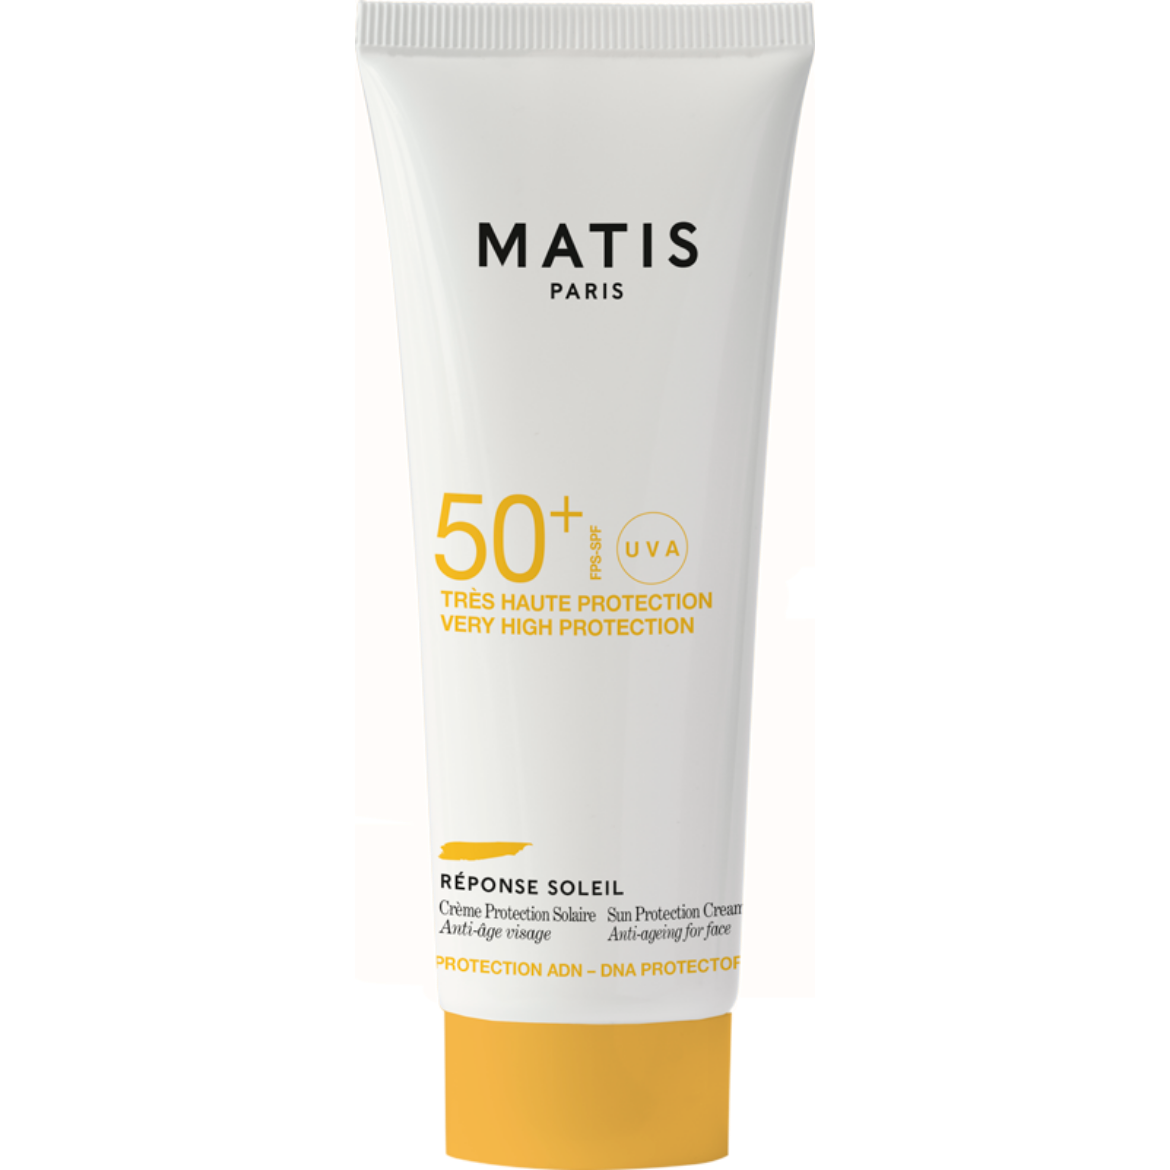 Image of Matis Crème Protection Solaire SPF 50+ (50ml)